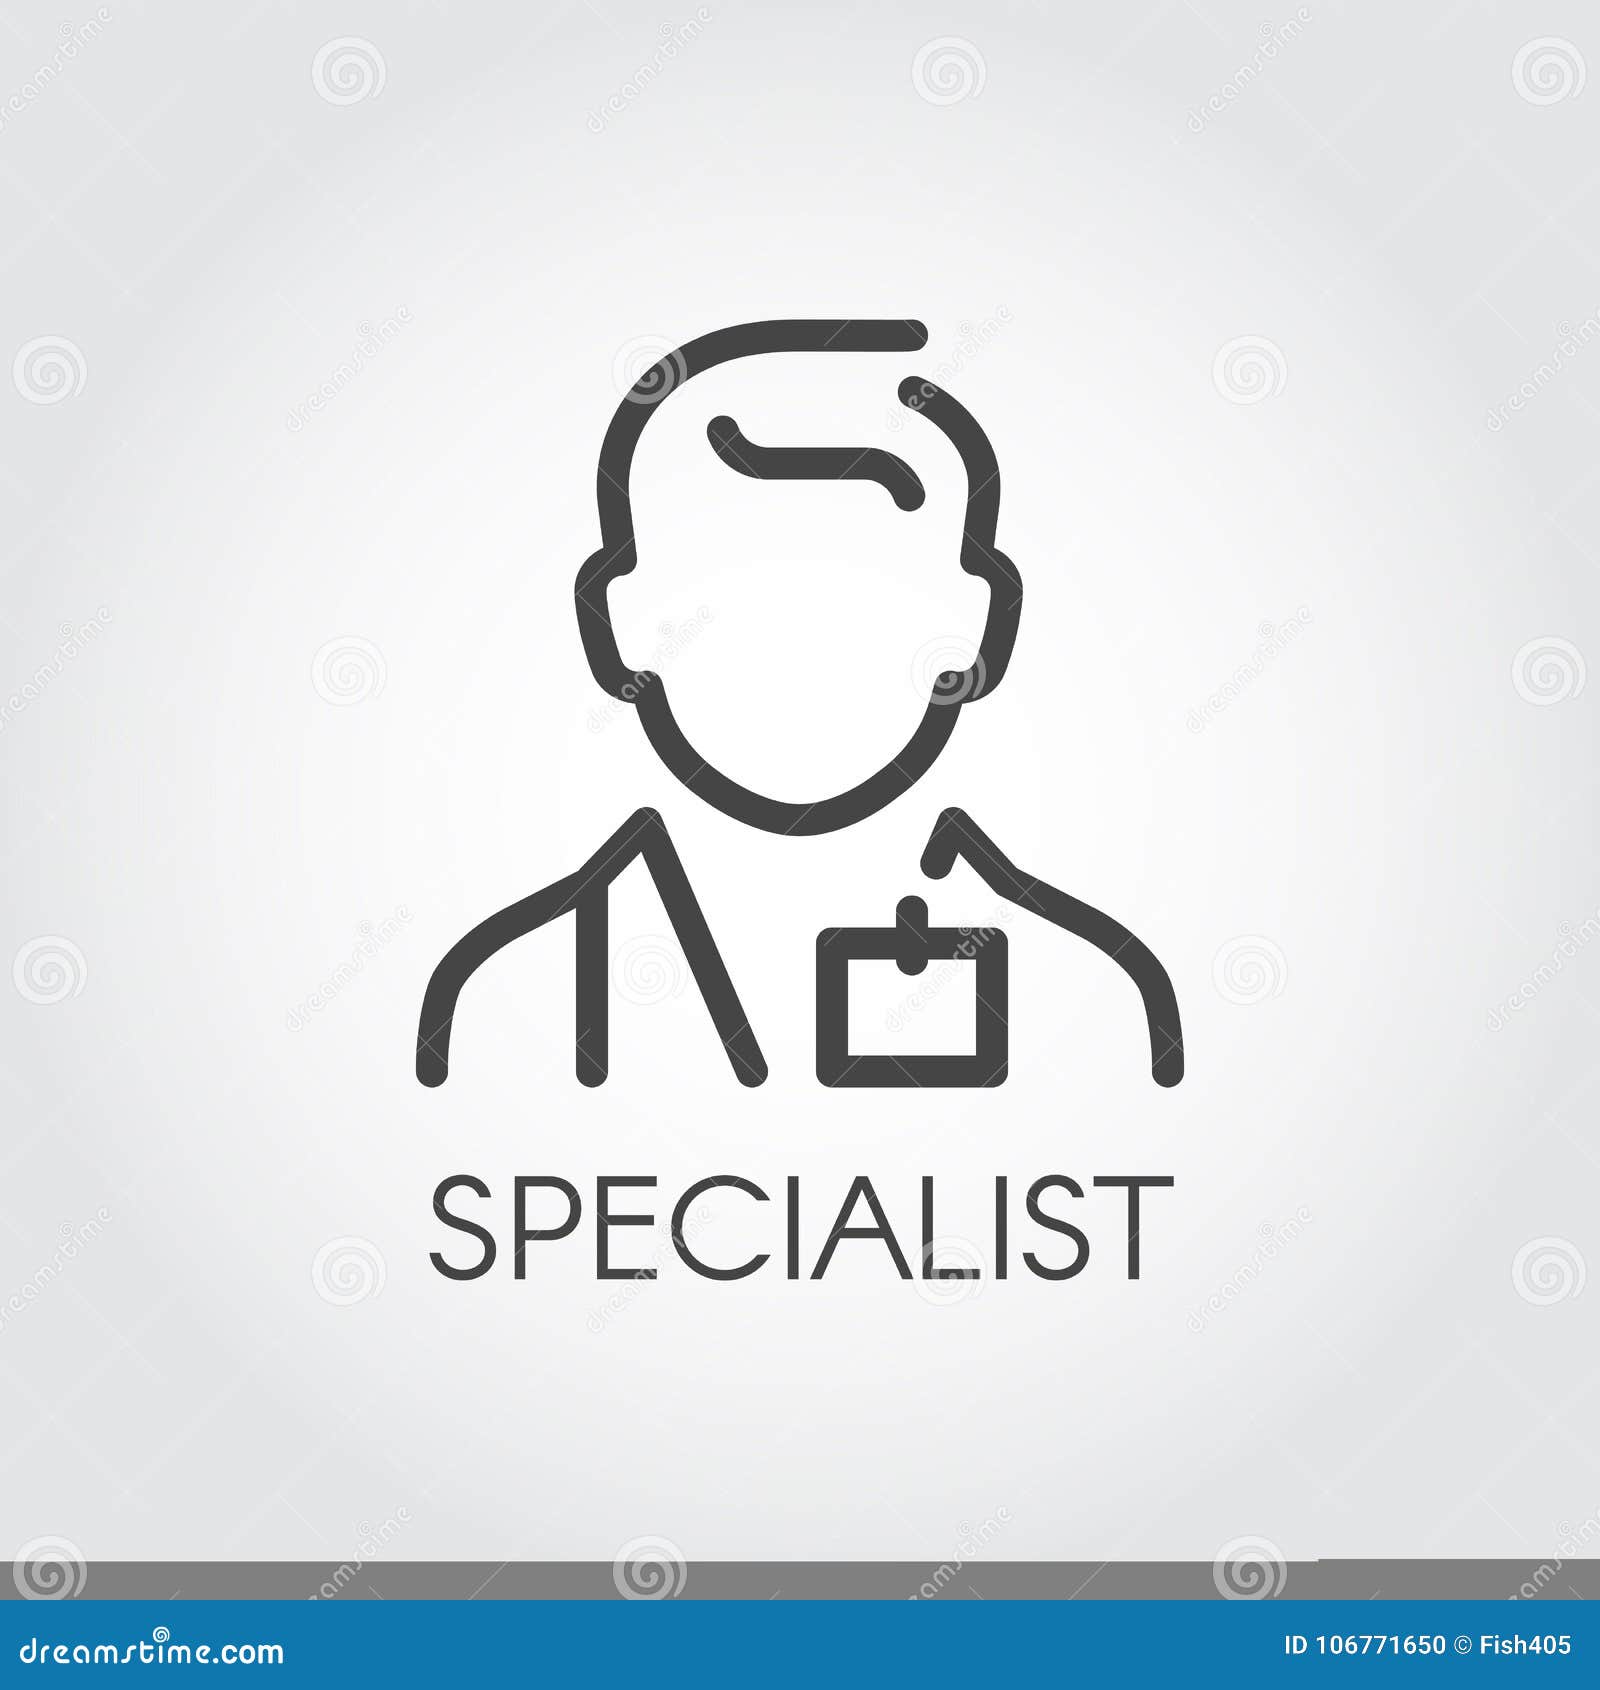 specialist of medical sciences, doctor, consultant outline icon. portrait of male doc. profession of helping people logo